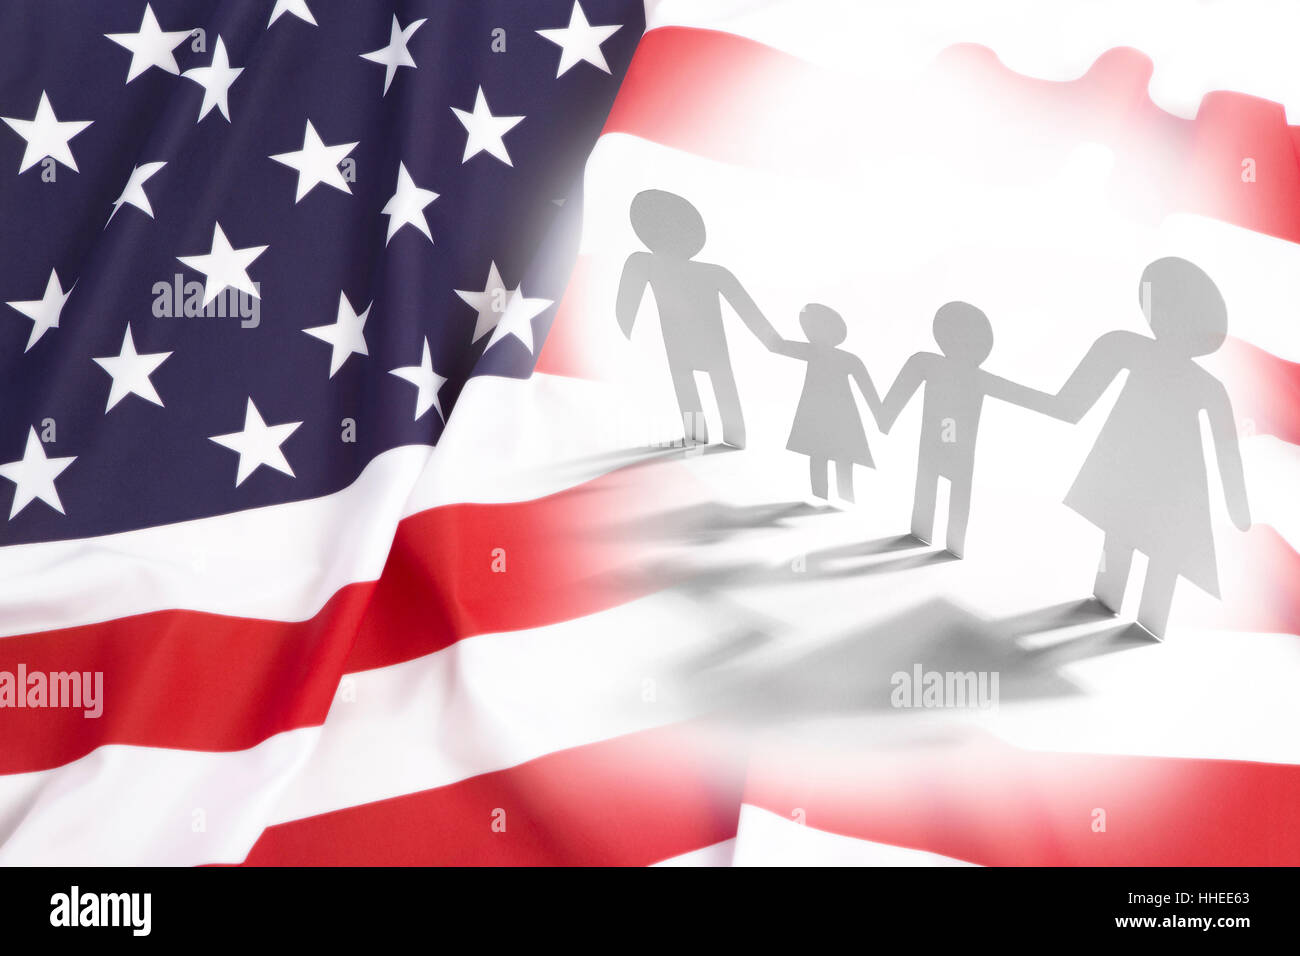 Family in the United States, paper figures concept Stock Photo